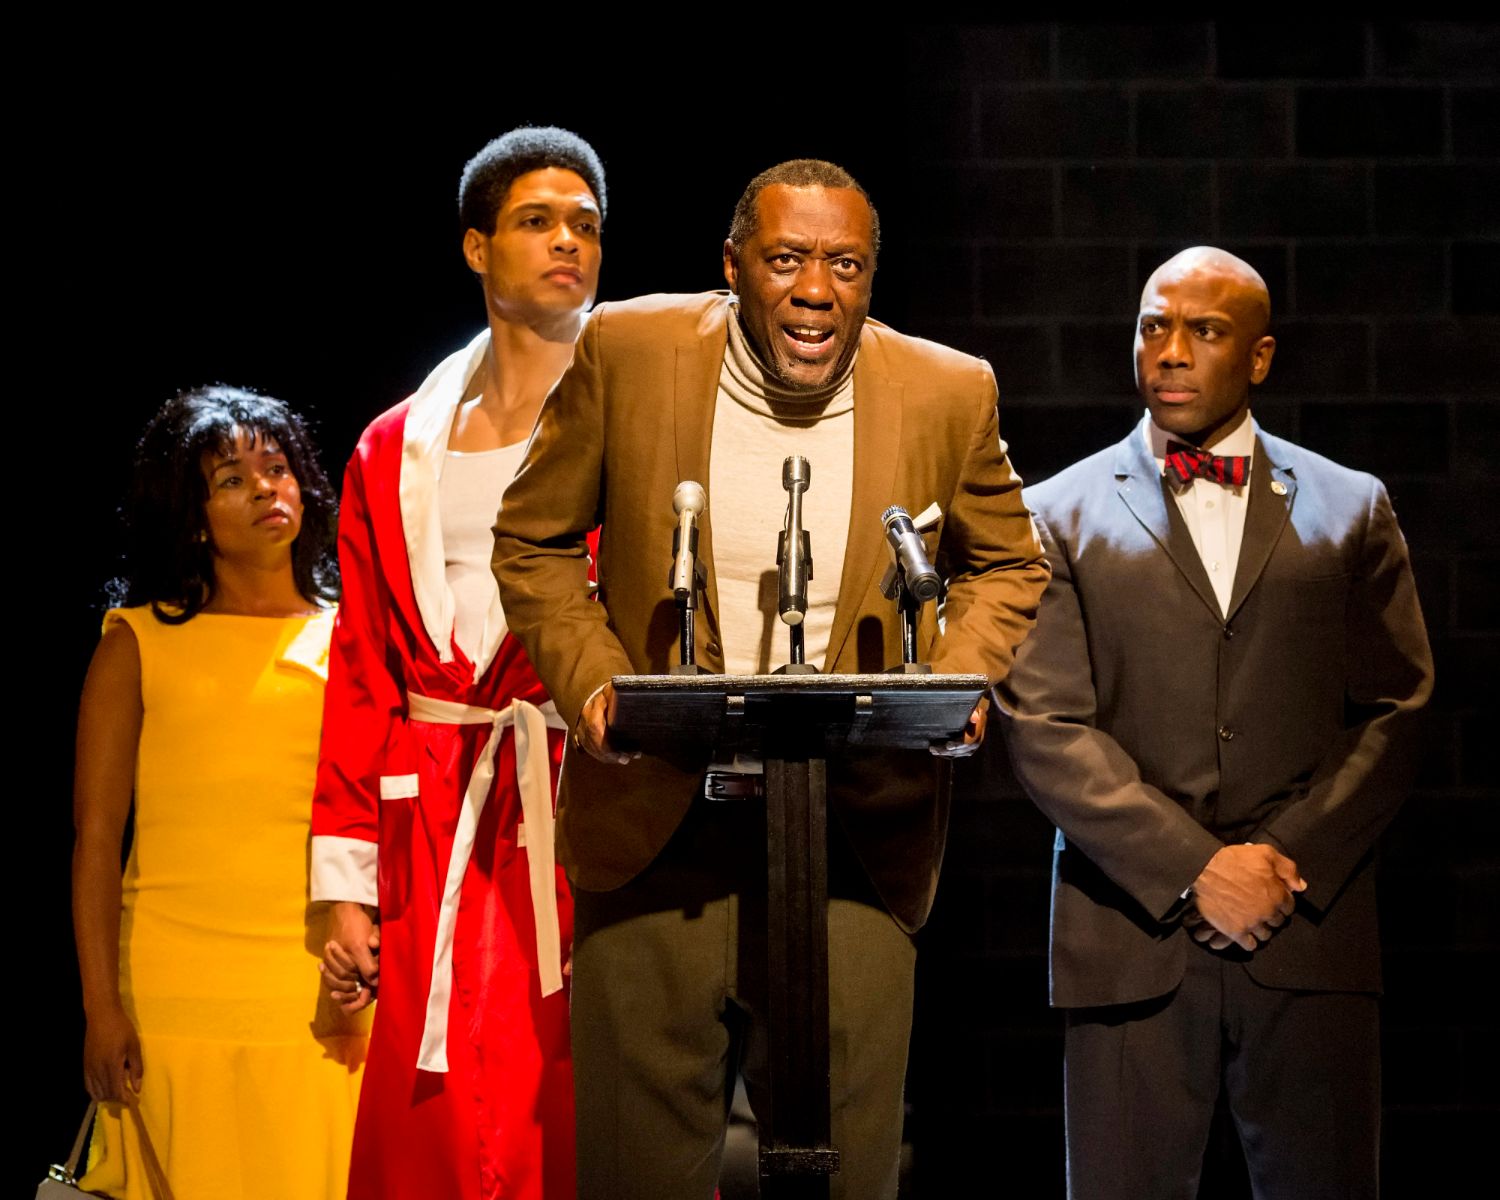 PHOTO: Craig Schwartz | The South Pasadenan | L to R: Alexis Floyd, Ray Fisher, Edwin Lee Gibson and Wilkie Ferguson III in “Fetch Clay, Make Man” at Center Theatre Group's Kirk Douglas Theatre June 18 through July 16, 2023, produced in association with The SpringHill Company.